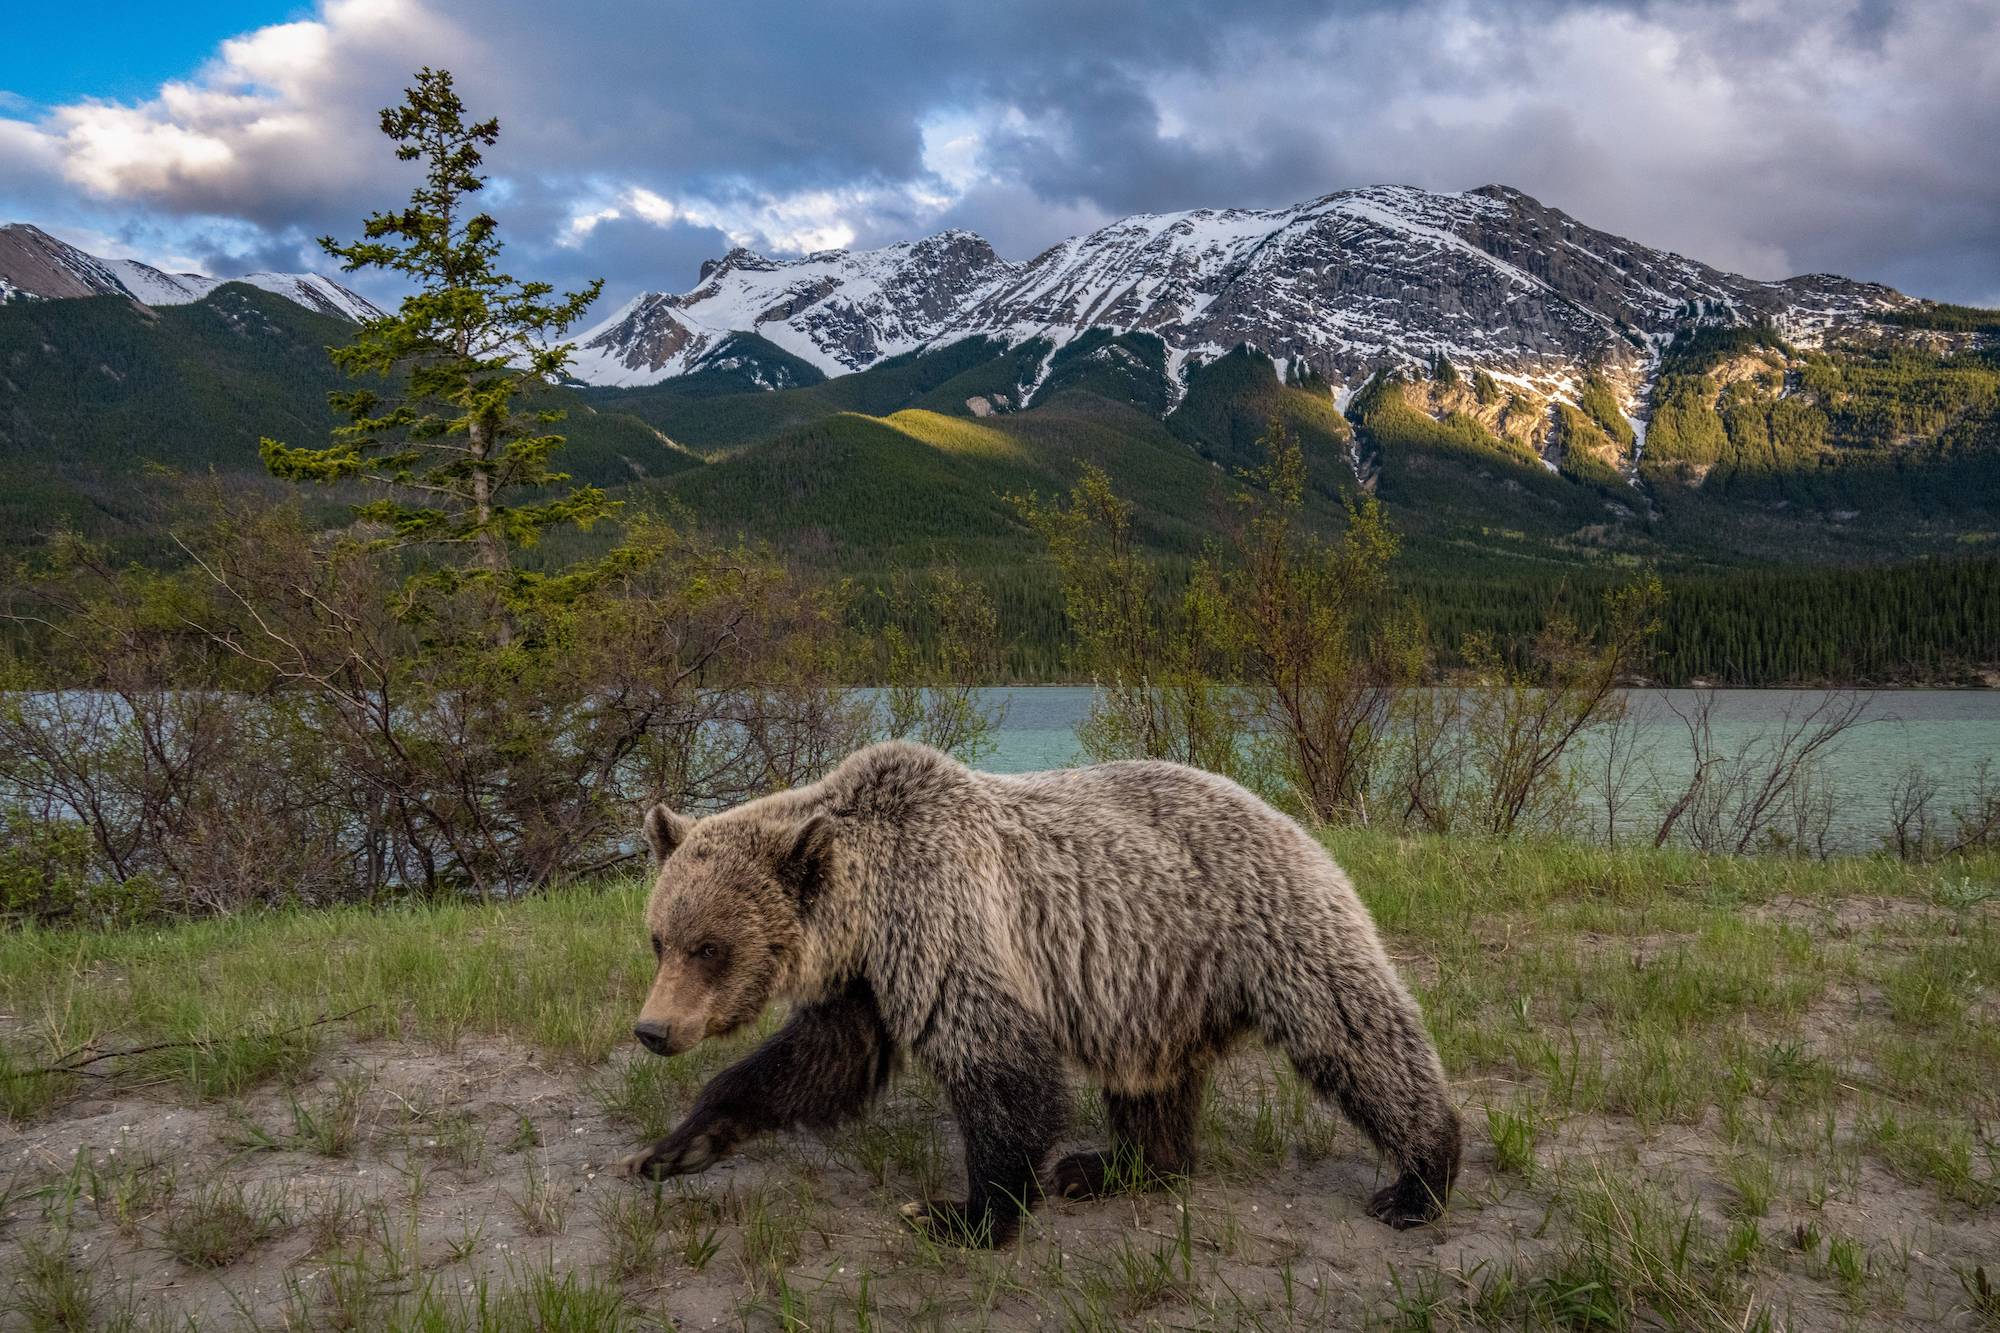 Bear With Us: How to Keep Yourself (And Grizzlies) Safe